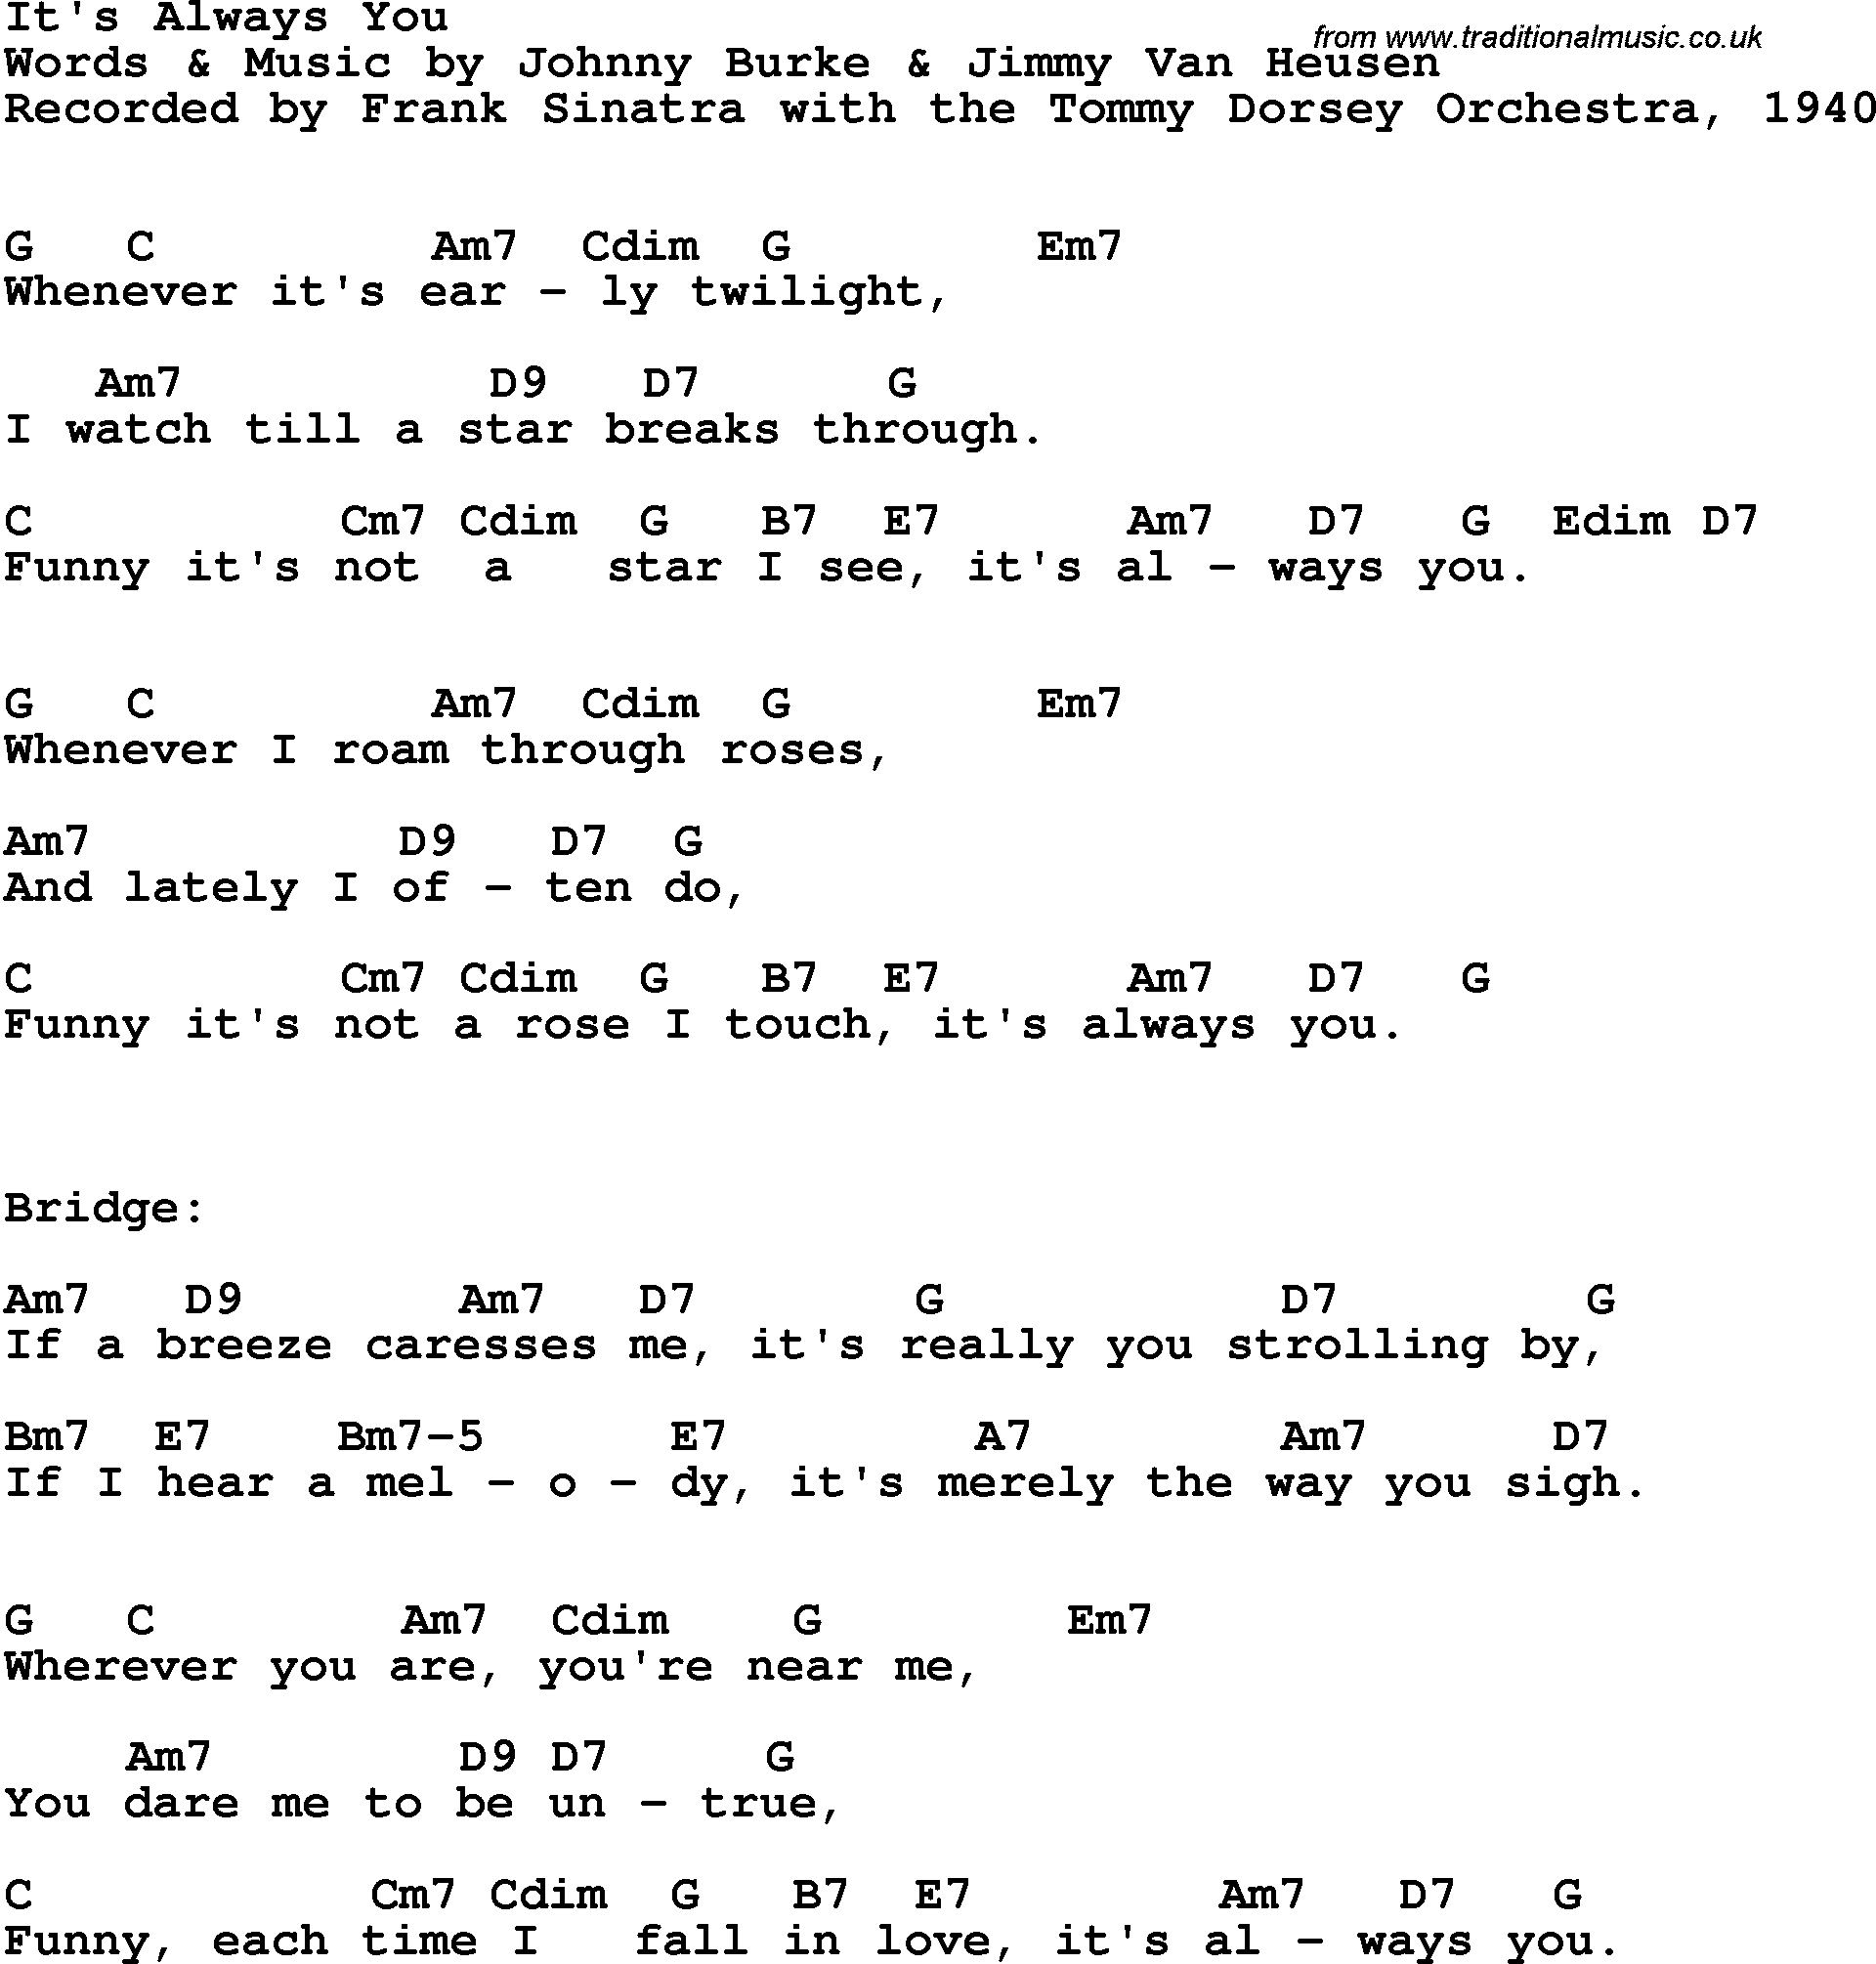 Song Lyrics with guitar chords for It's Always You - Frank Sinatra, 1940